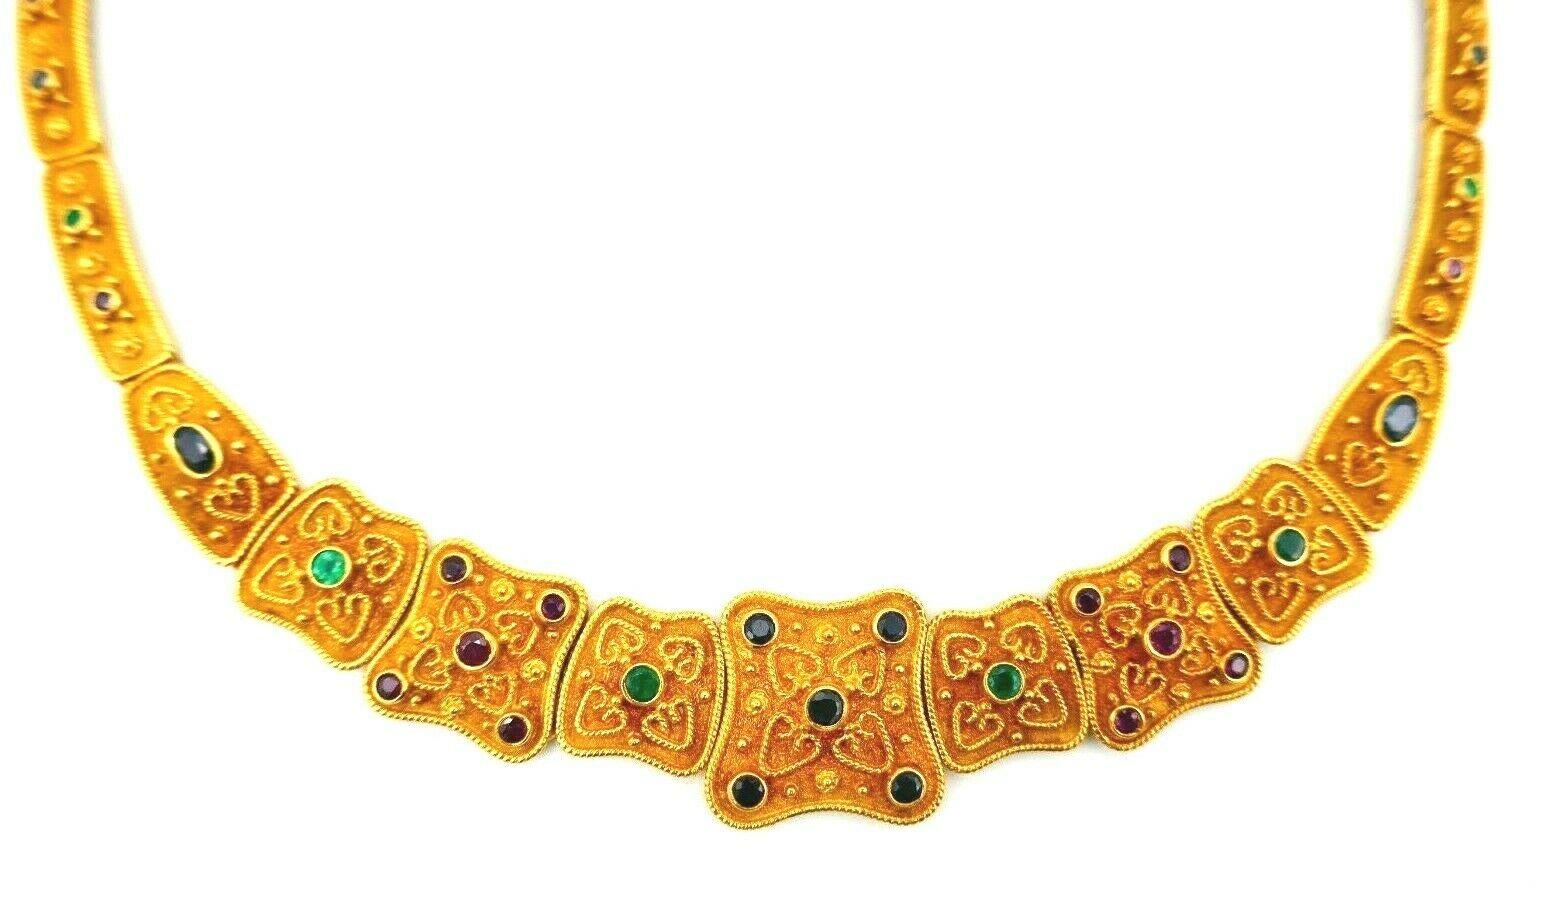 A beautiful collar necklace made of textured 18k yellow gold featuring ruby, emerald and sapphire. 
Comprised of the flat links are connected by hinges. 
Stamped with maker's mark and a hallmark for 18k gold.
Measurements: 16